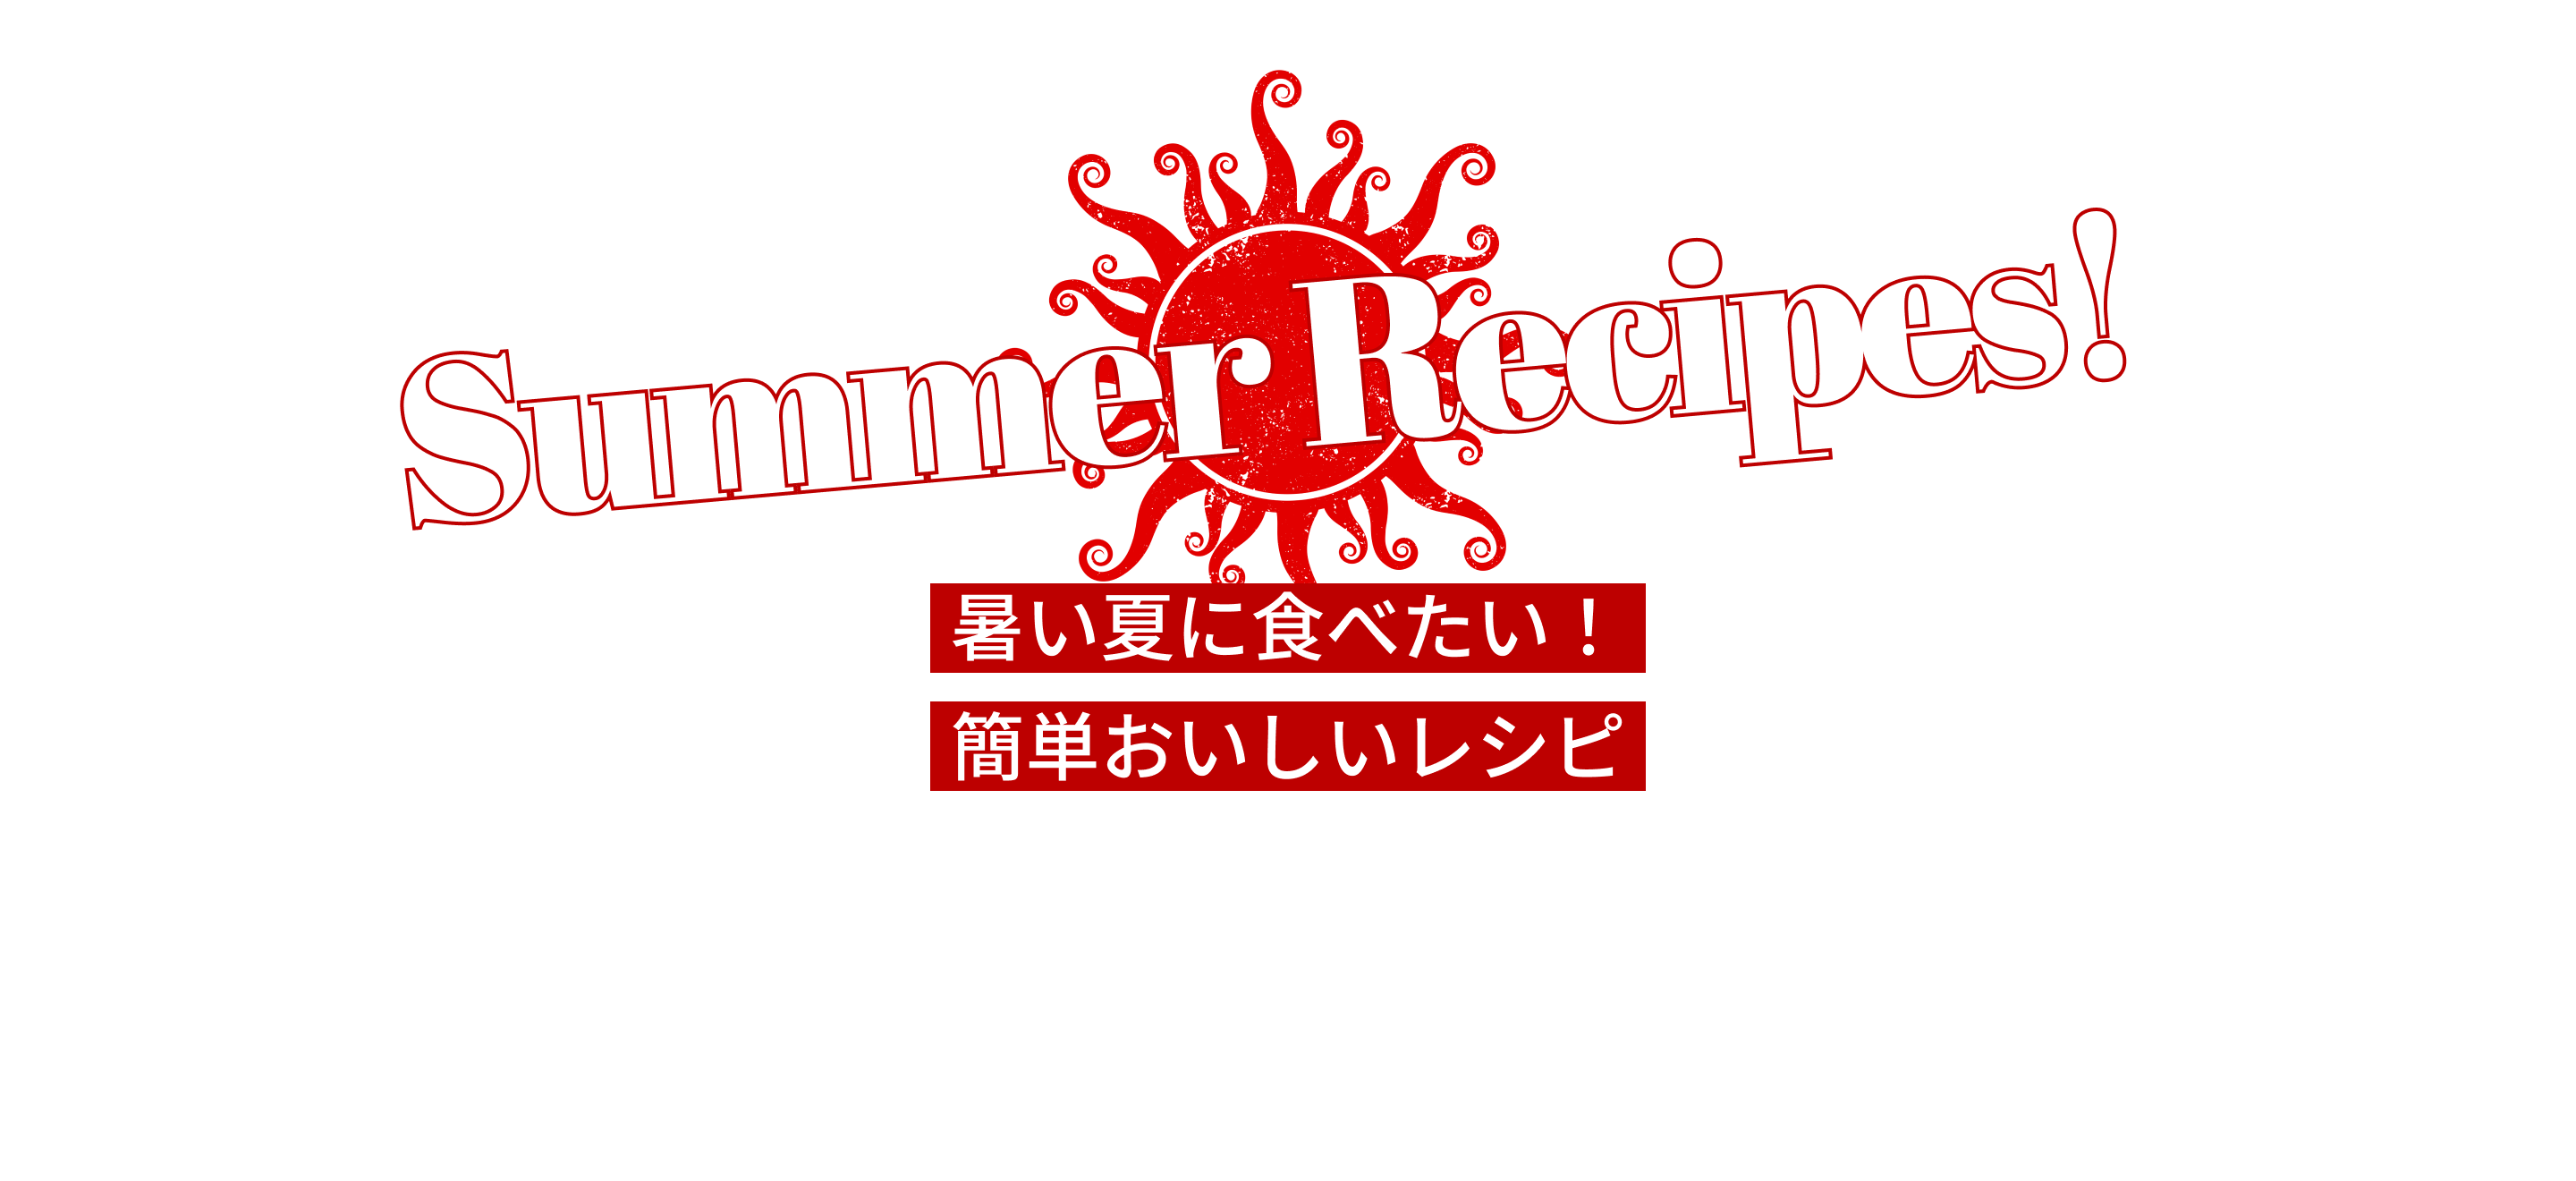 Fun cooking with T-fal 「暑い夏に食べたい！簡単おいしいレシピ」